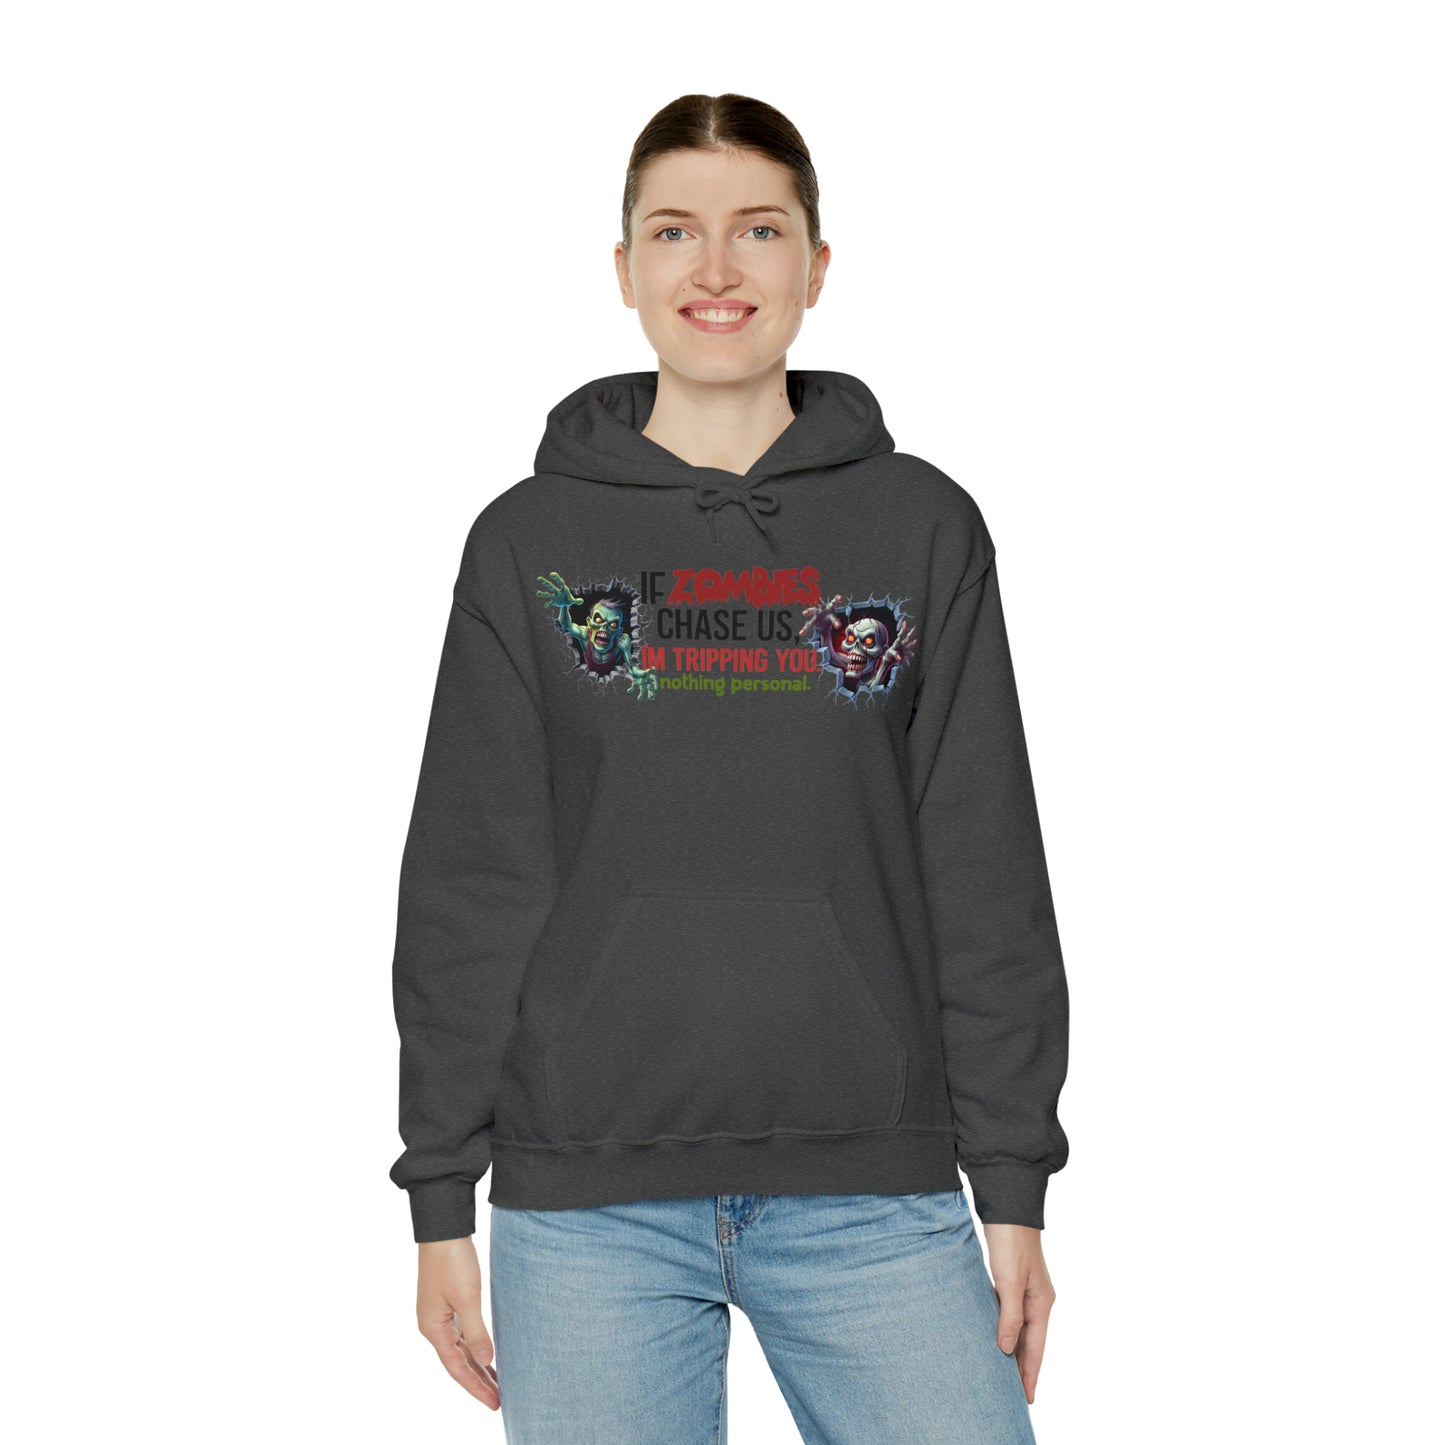 If Zombies Chase Us, I'm Tripping You. Nothing Personal: Unisex Heavy Blend™ Hooded Sweatshirt